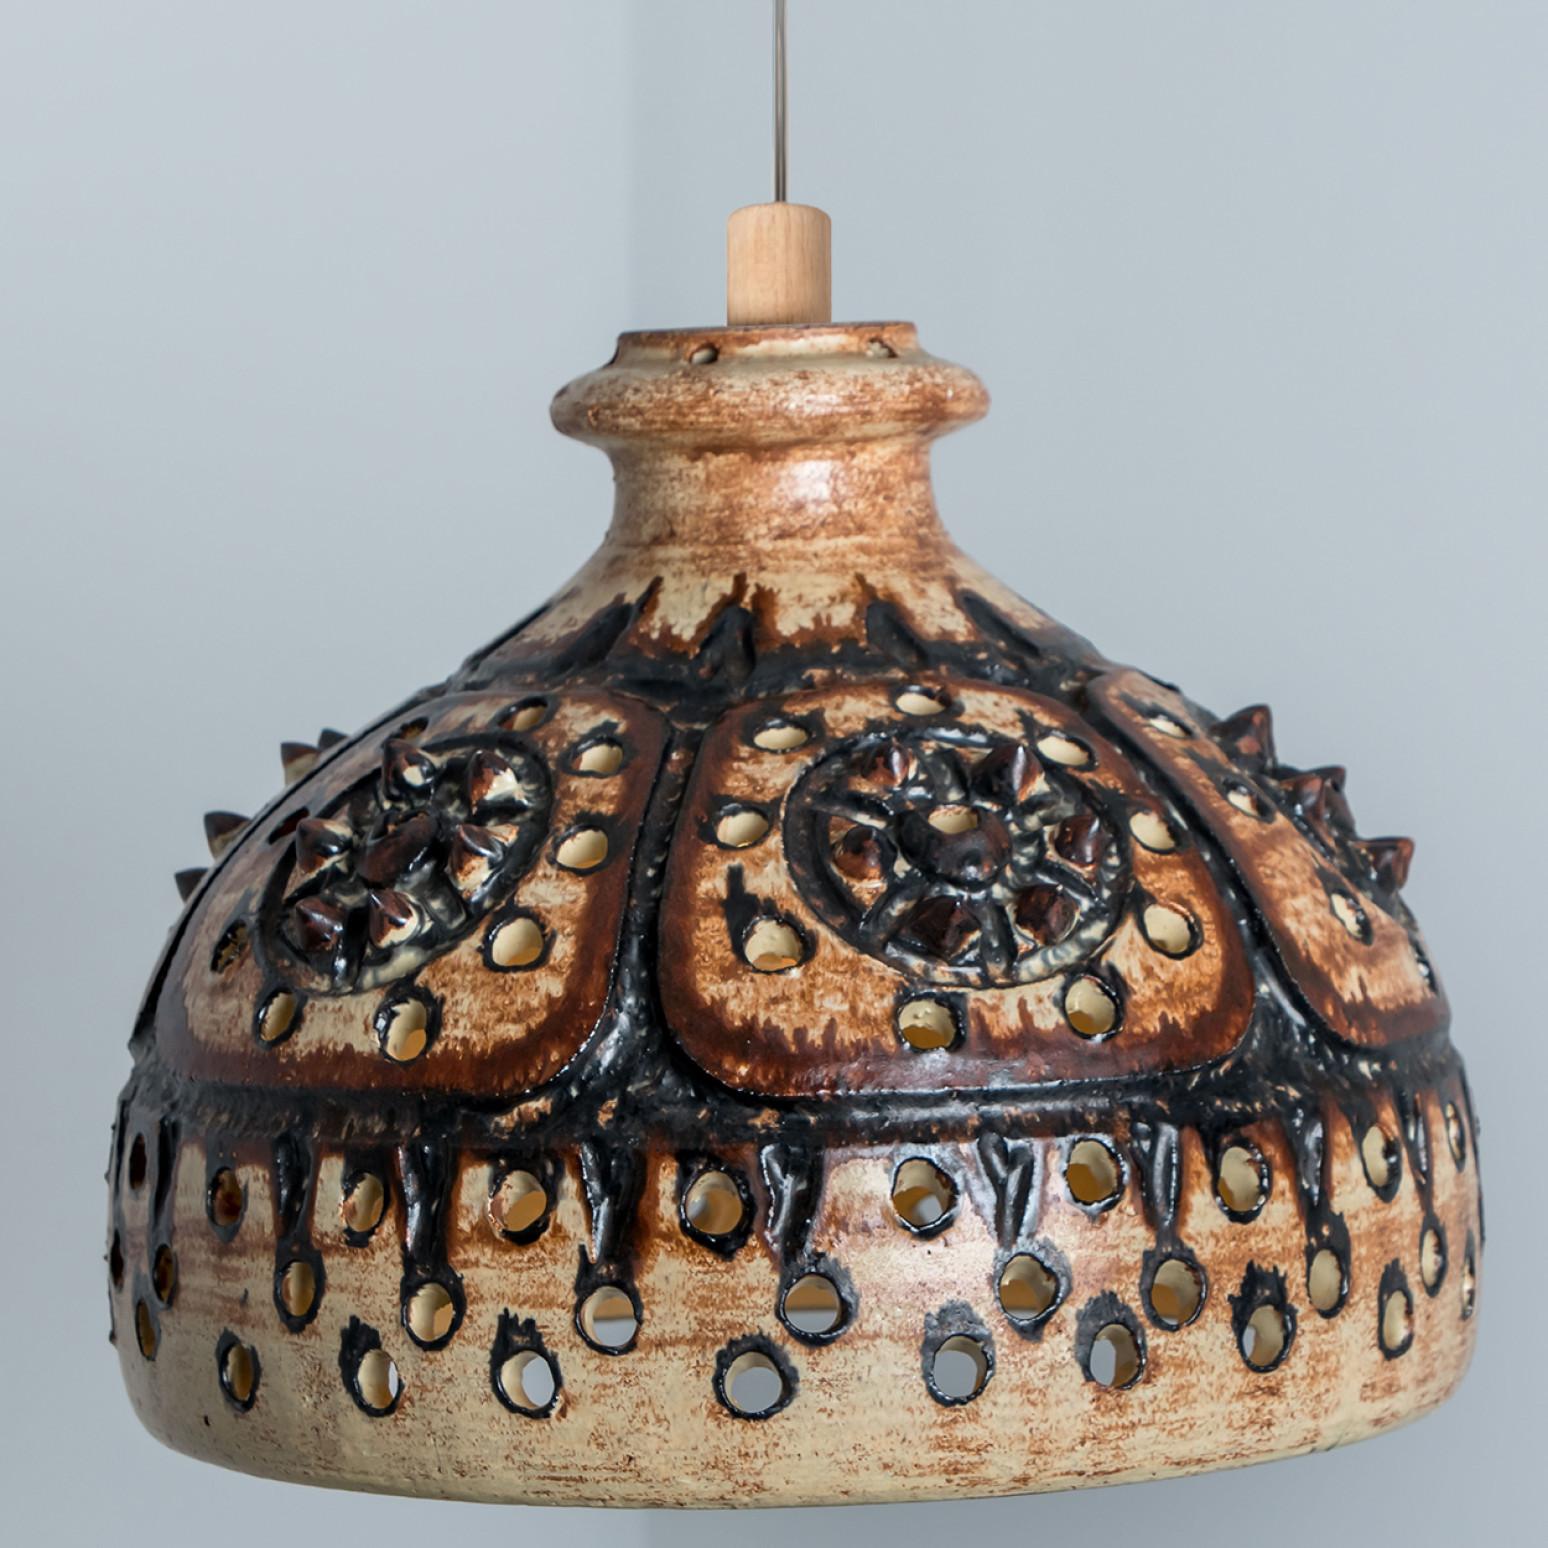 Stunning round hanging lamp with an cone-like shape, made with rich chocolate colored brown ceramics, manufactured in the 1970s in Denmark. We also have a multitude of unique colored ceramic light sets and arrangements, all available in the